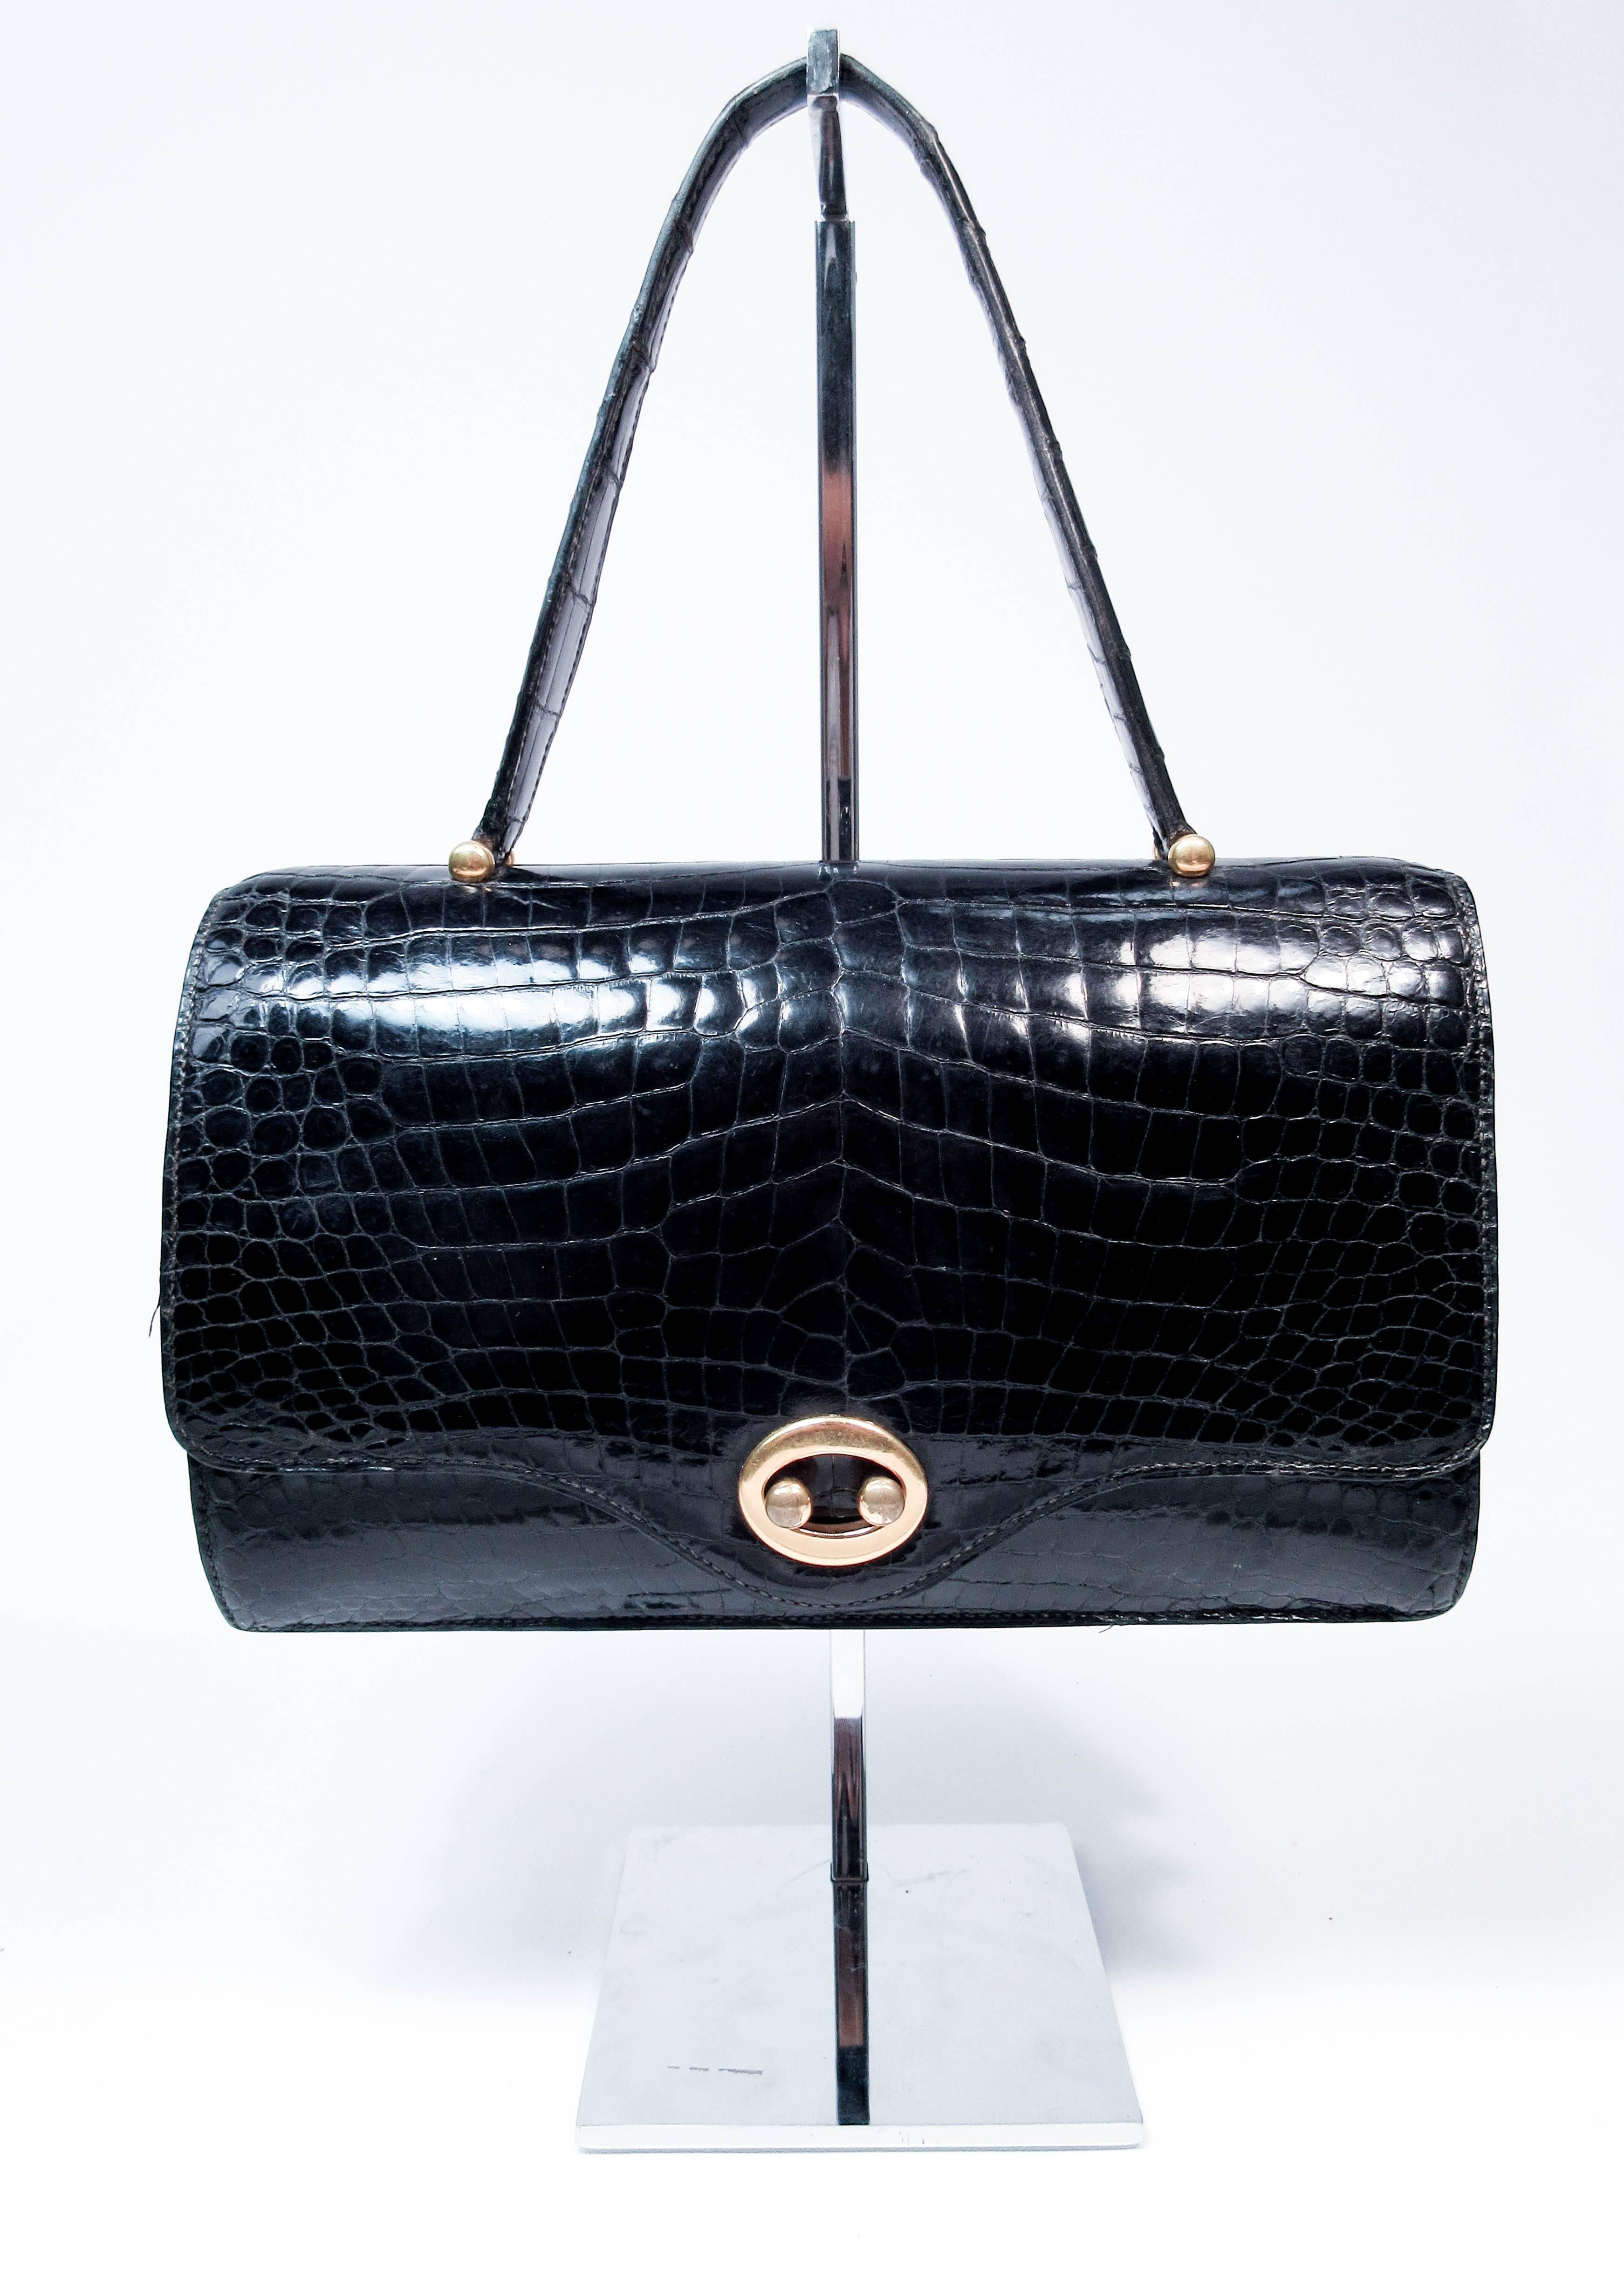 This Hermes purse is composed of a stunning black crocodile and features gold hardware with a top handle design. There are multiple interior compartments. In excellent pre-owned vintage condition. Made in France.

**Please cross-reference